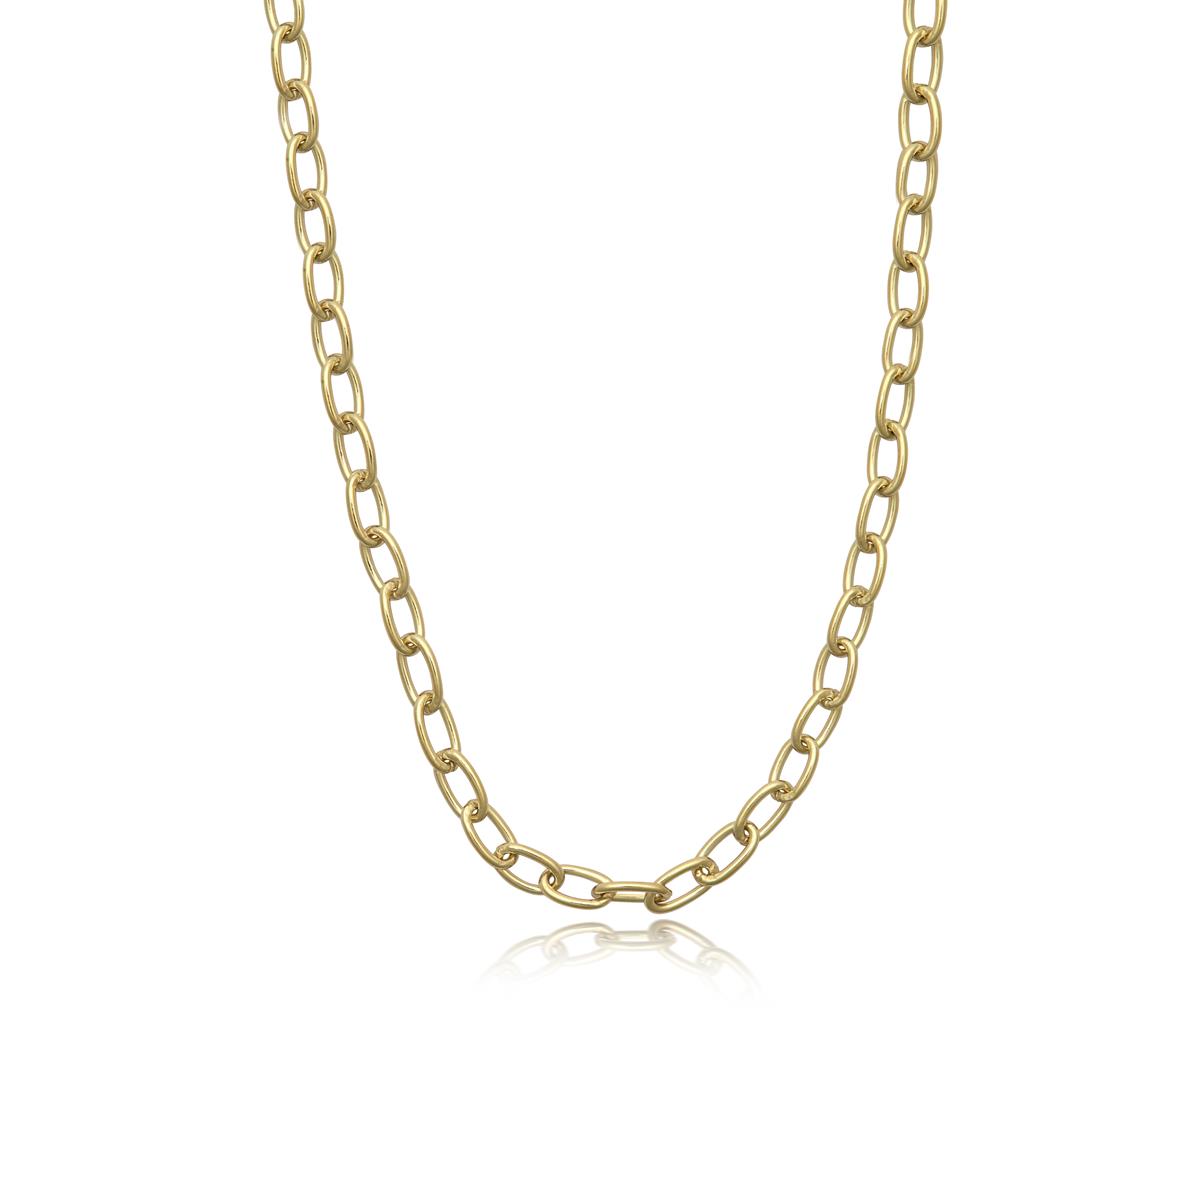 Achara Classic Cable Chain 18 Inch Necklace  - Gold 